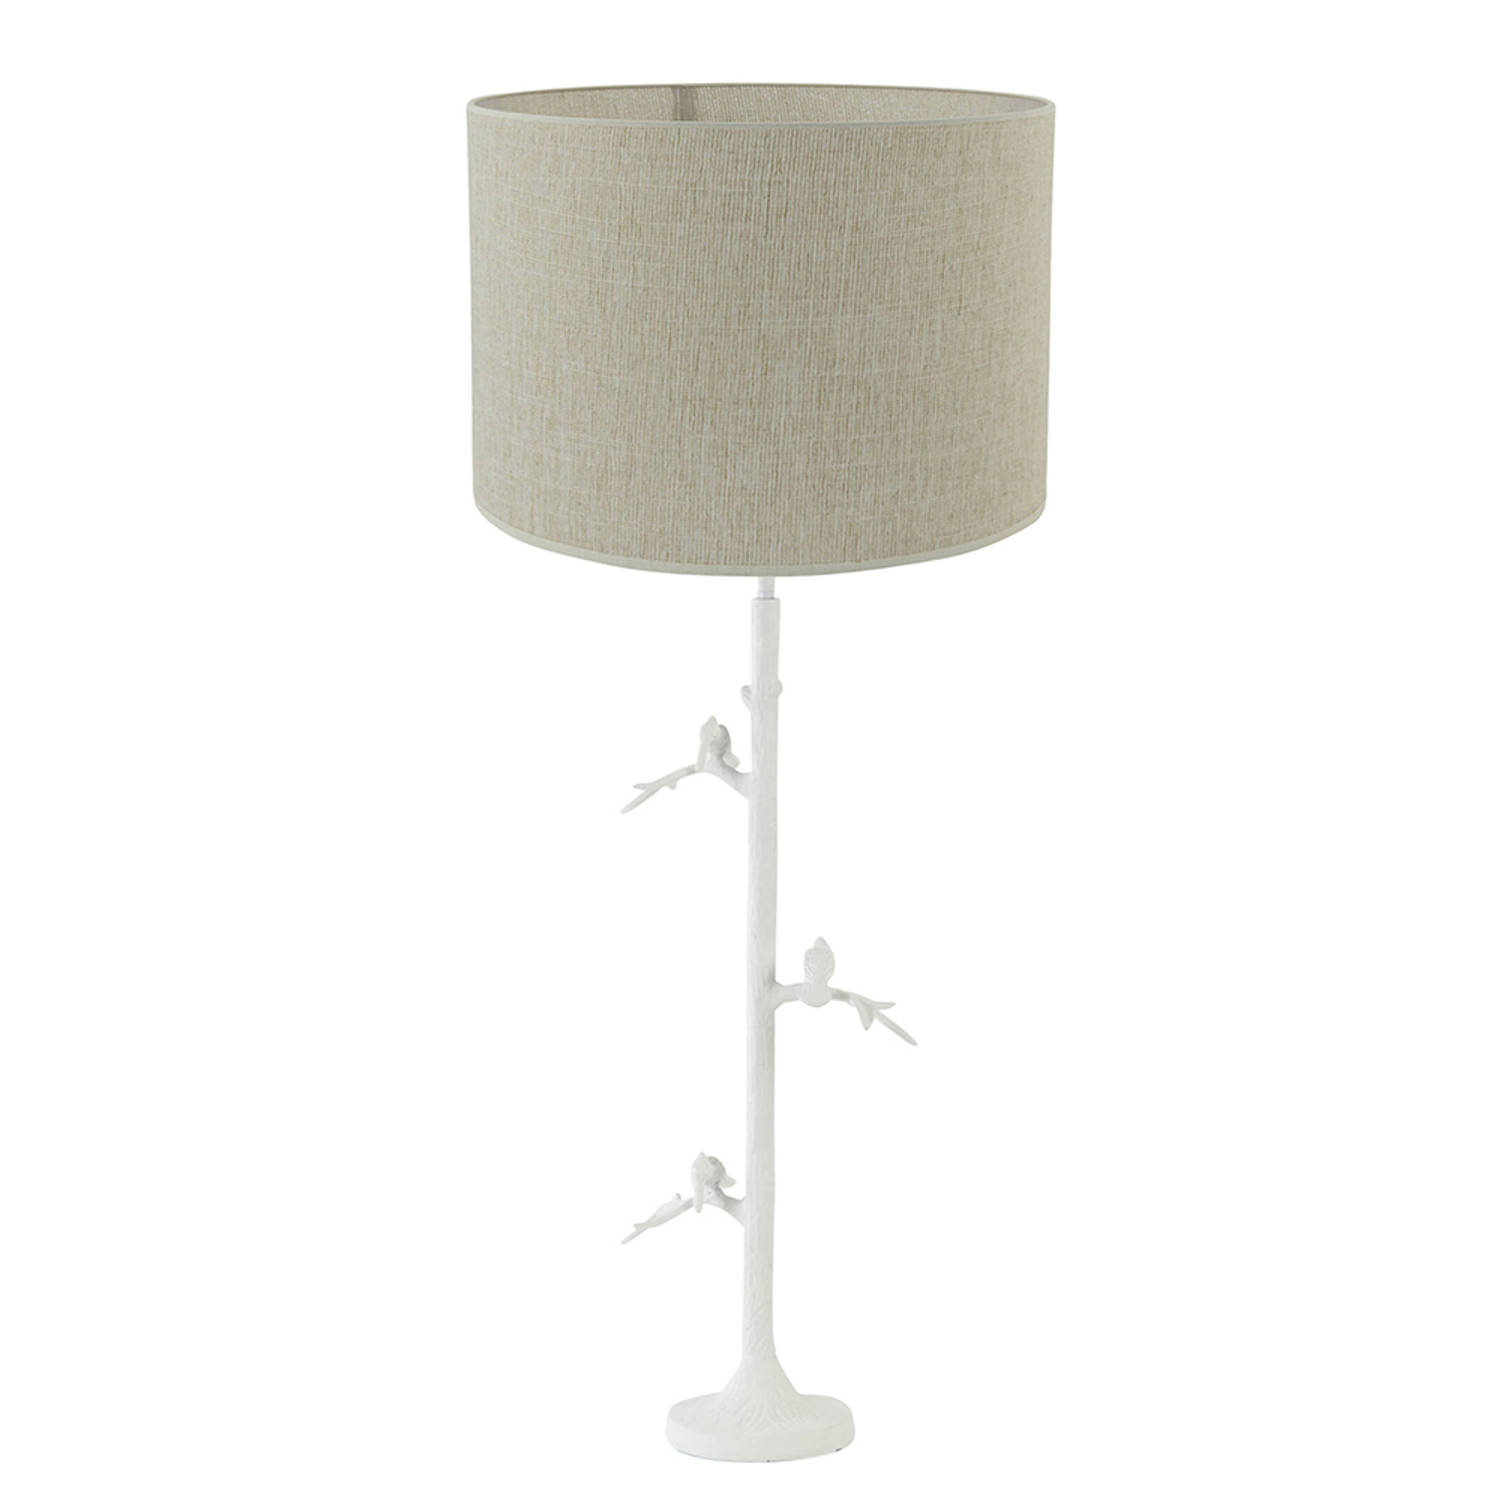 Light and Living Branch tafellamp - Ø 40 cm - E27 (grote fitting) - wit